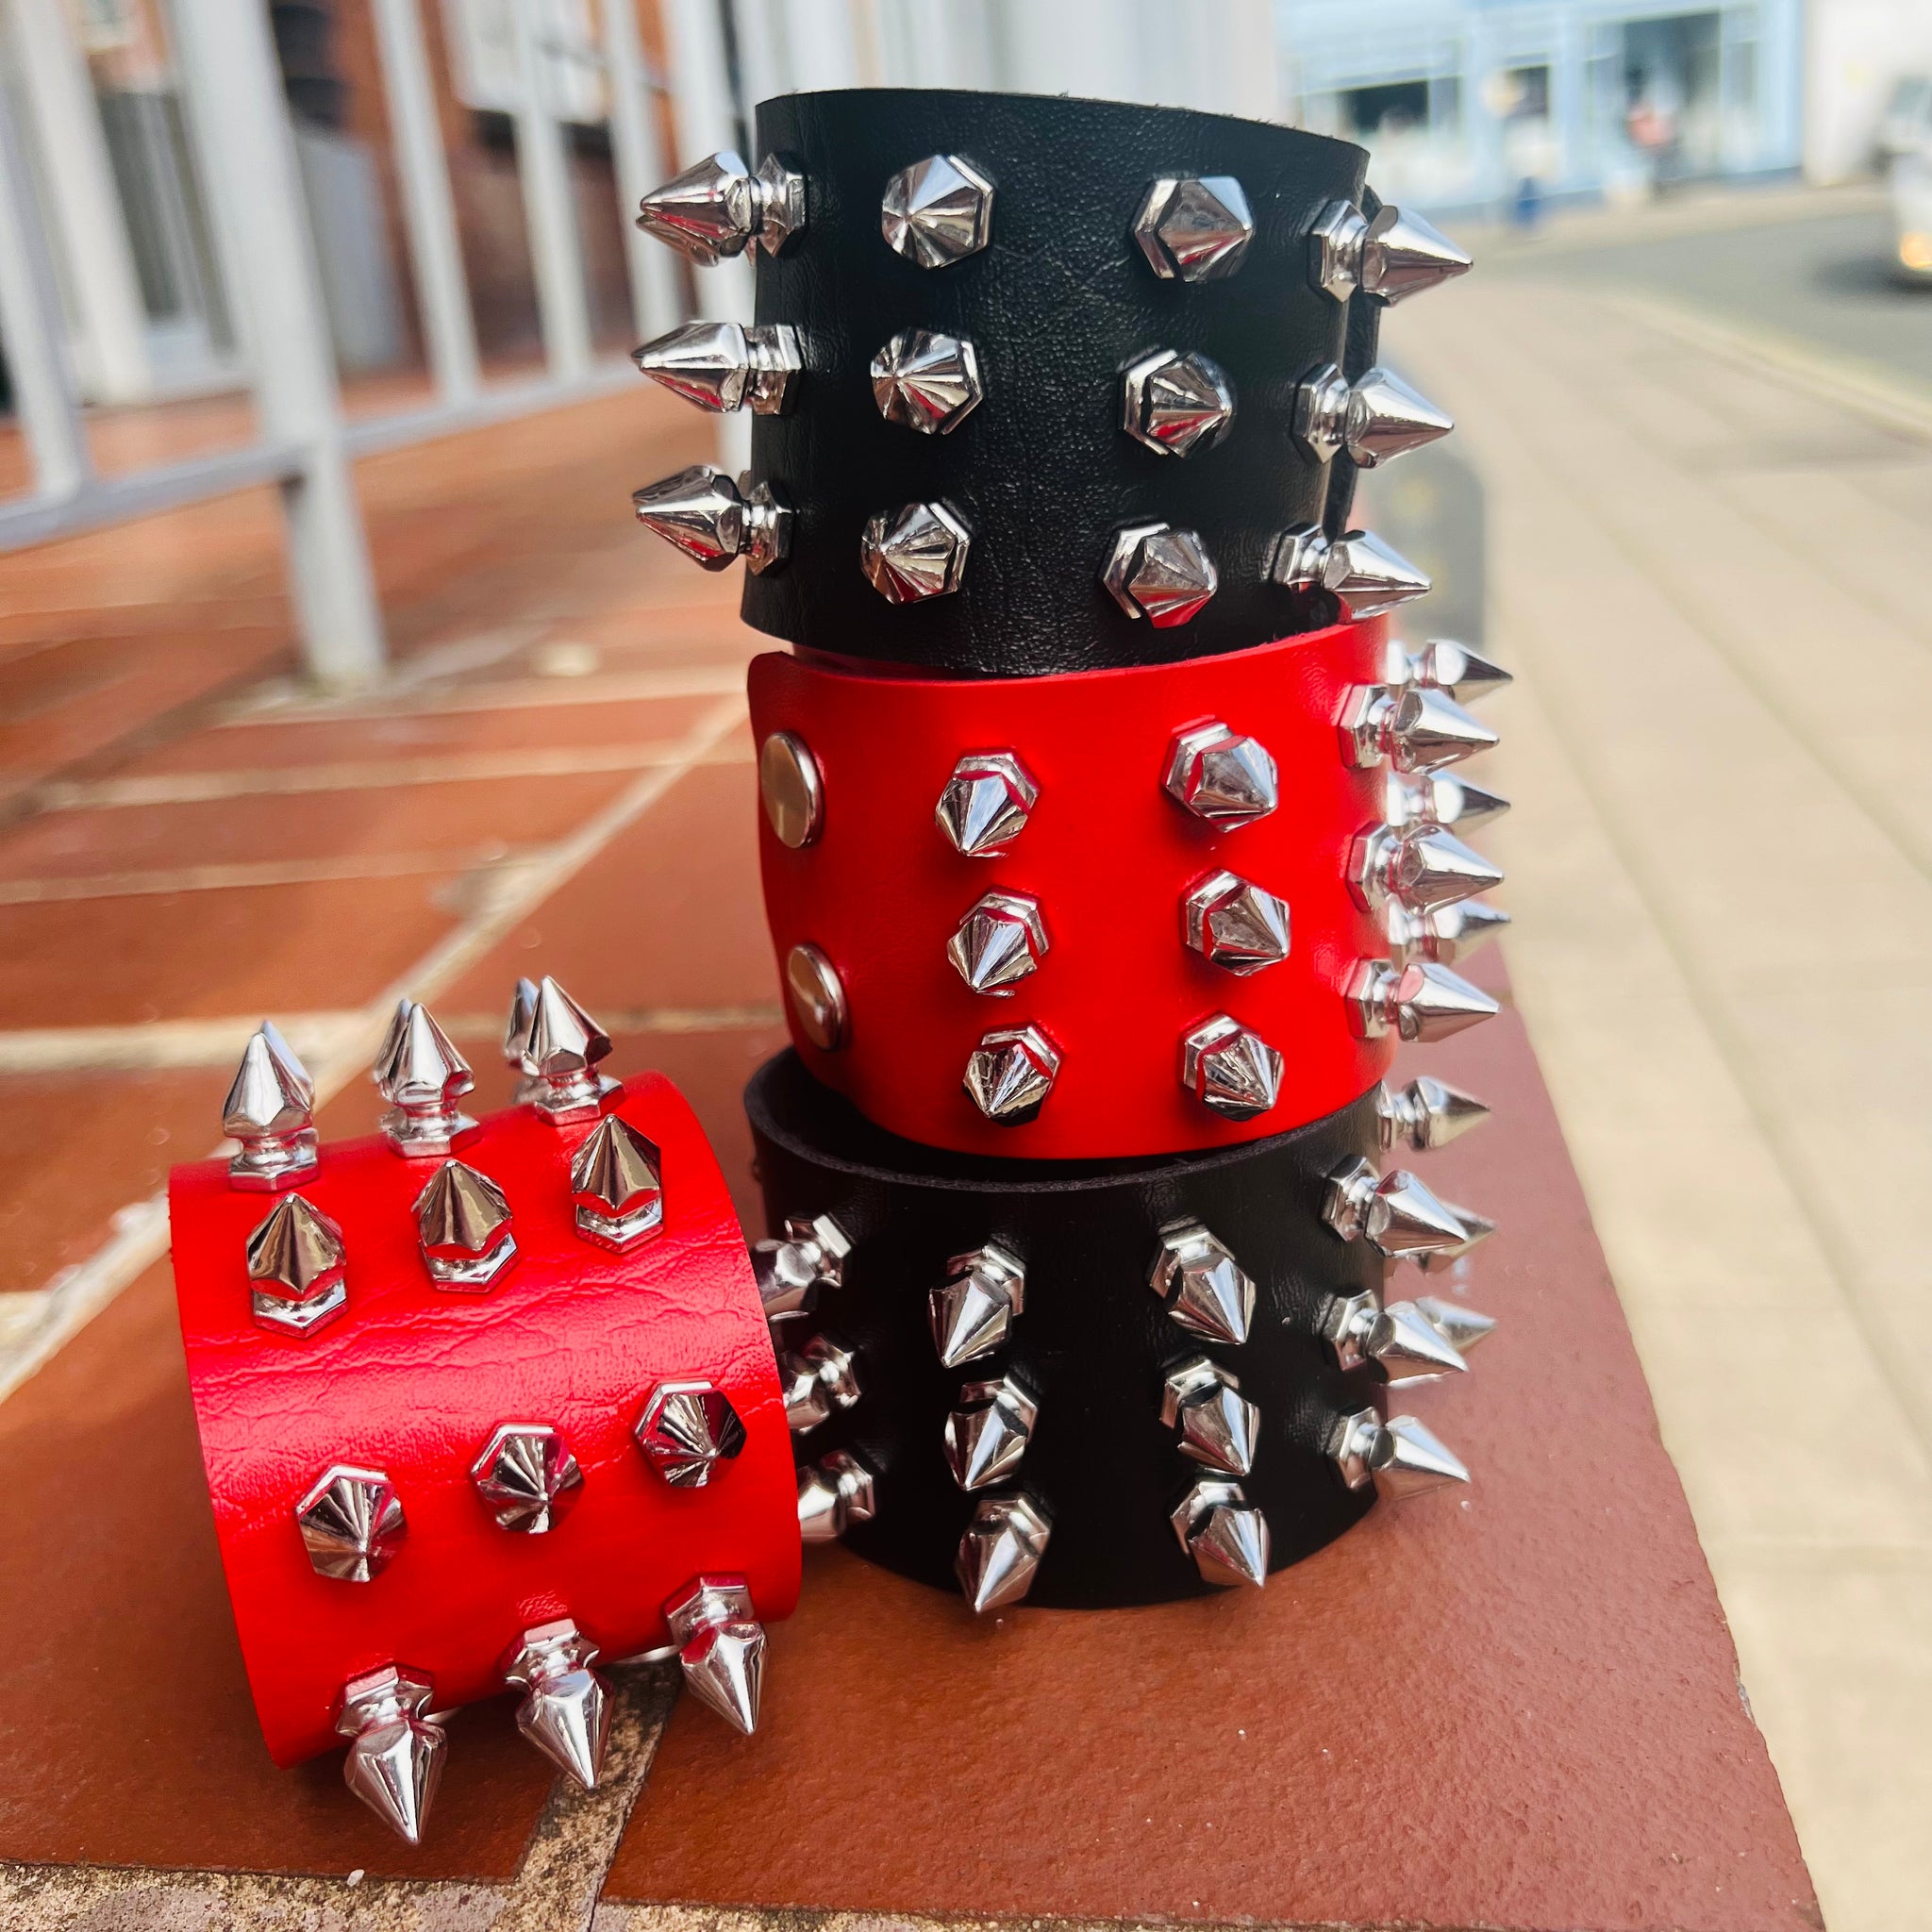 Wrist Cuff With 21 Riveted Spikes